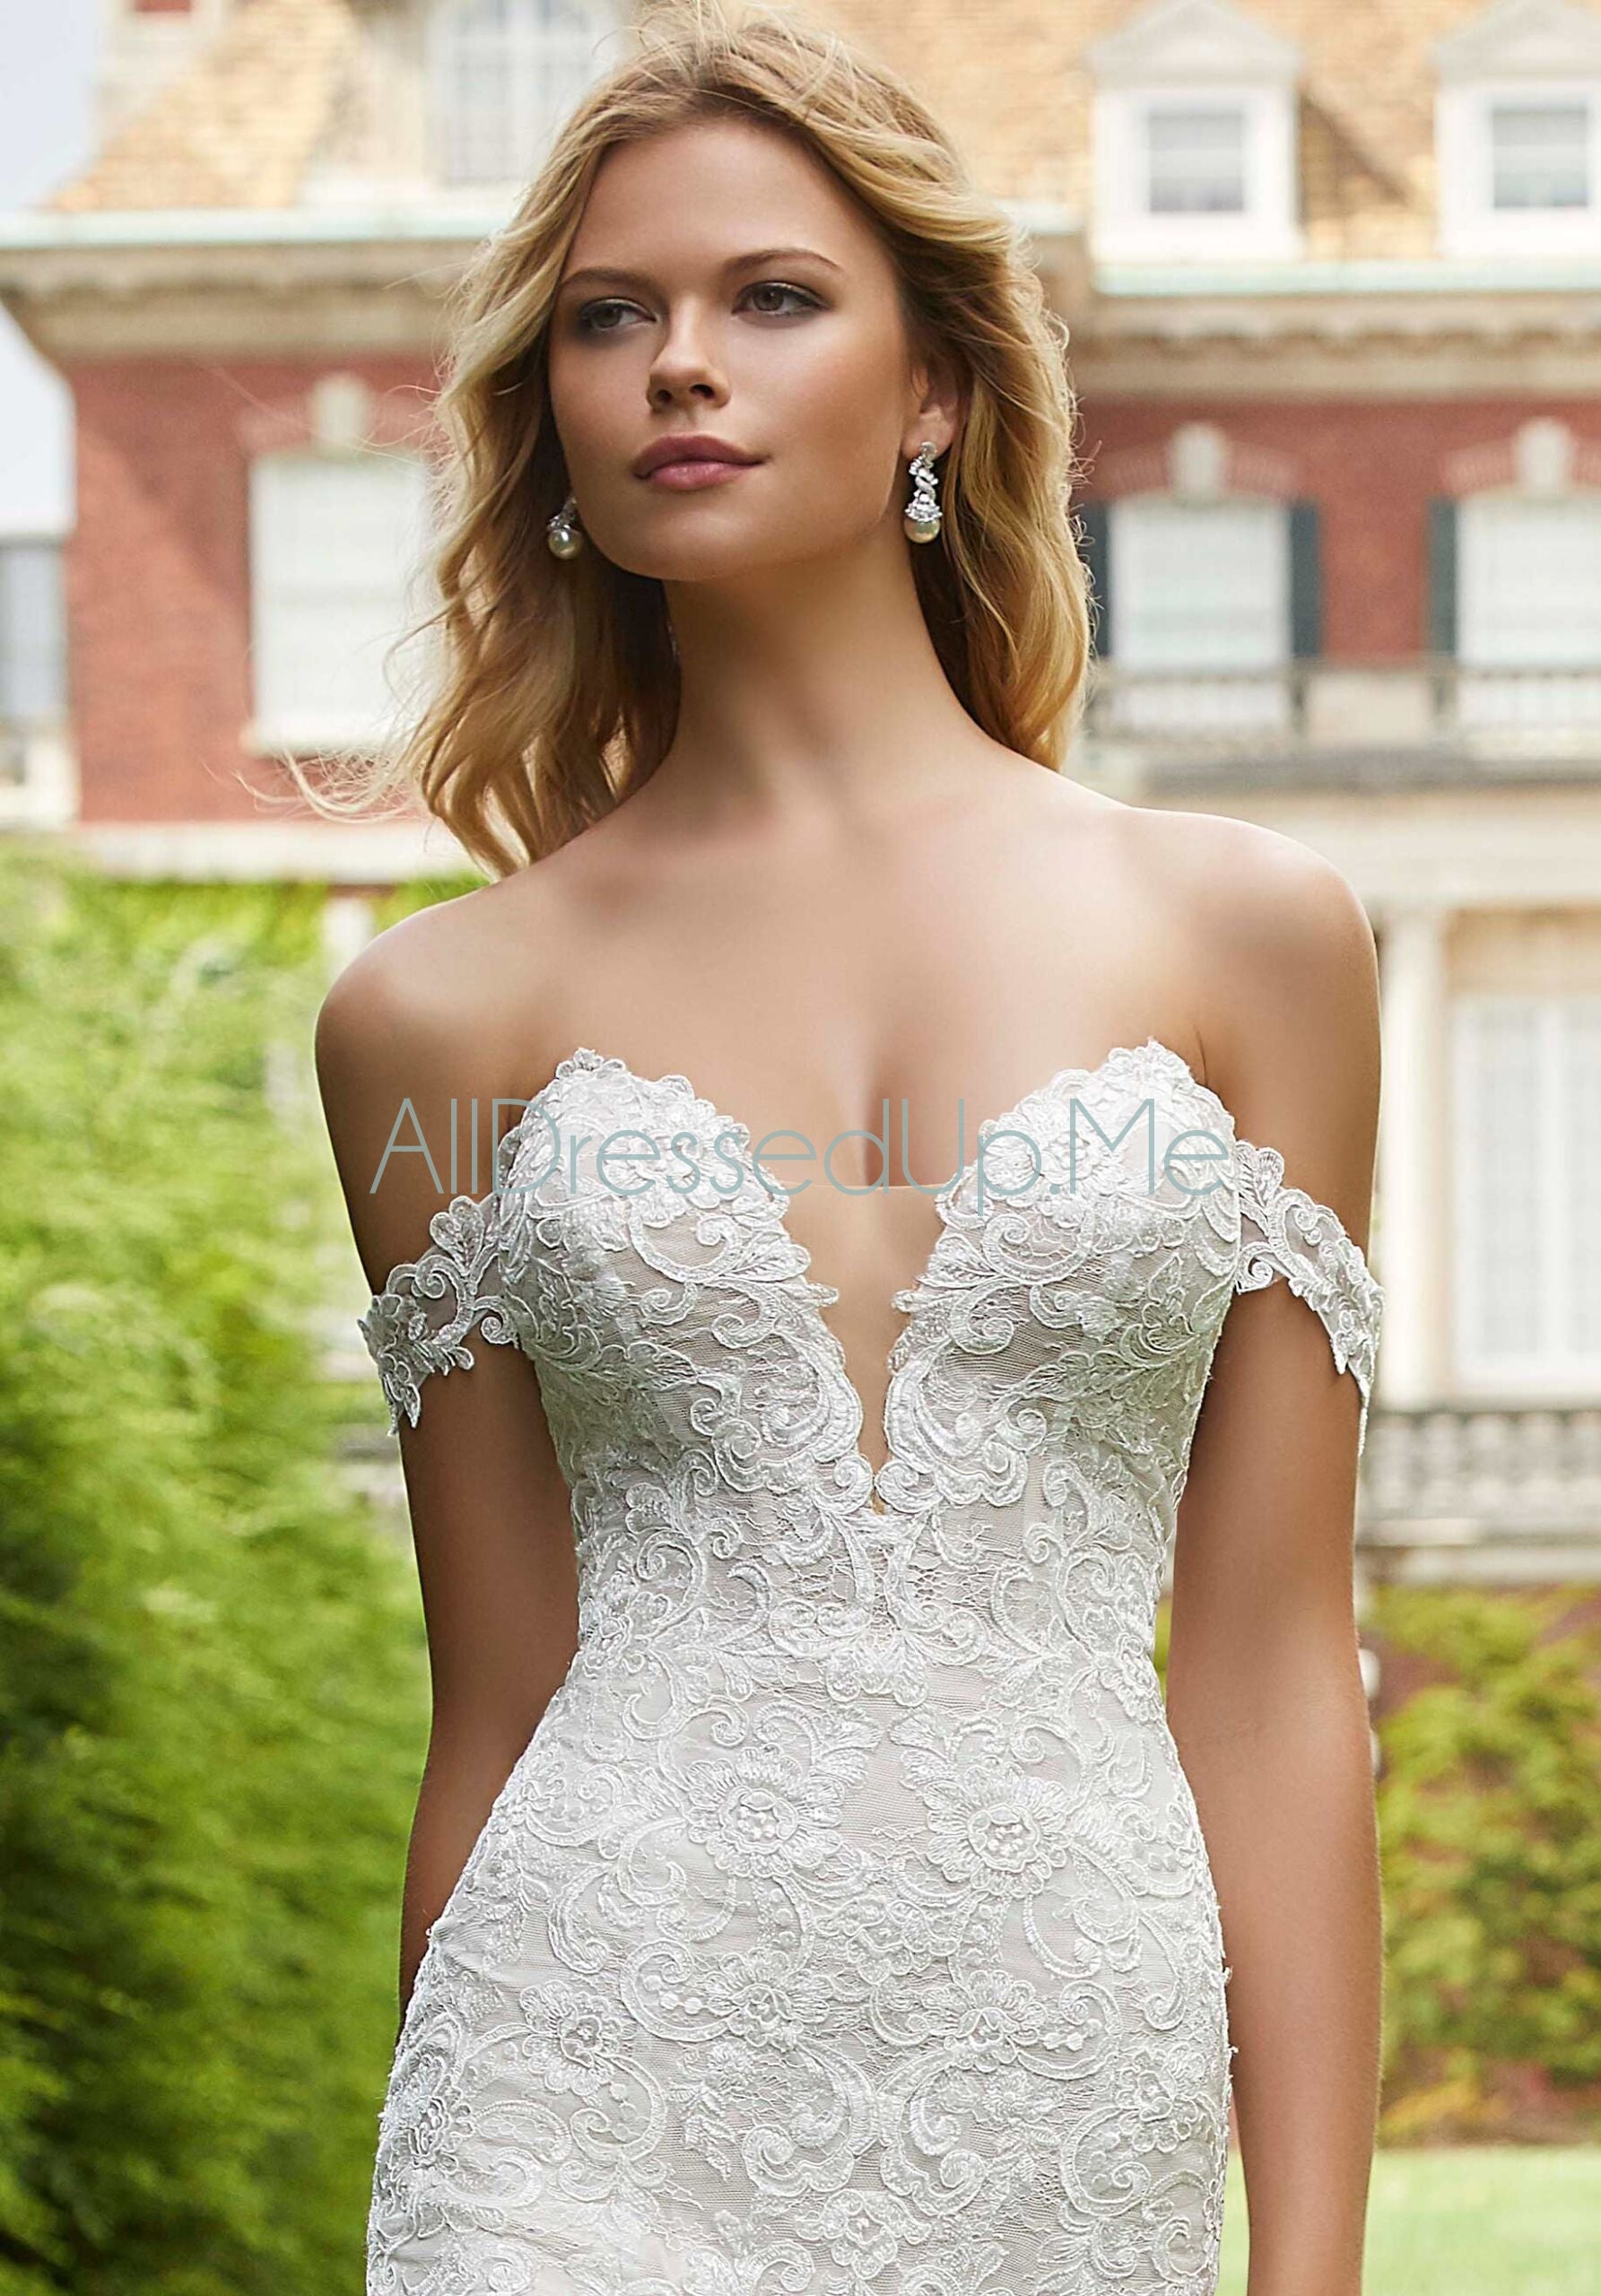 ML Accessories - 11303 - All Dressed Up, Bridal Cap Sleeves